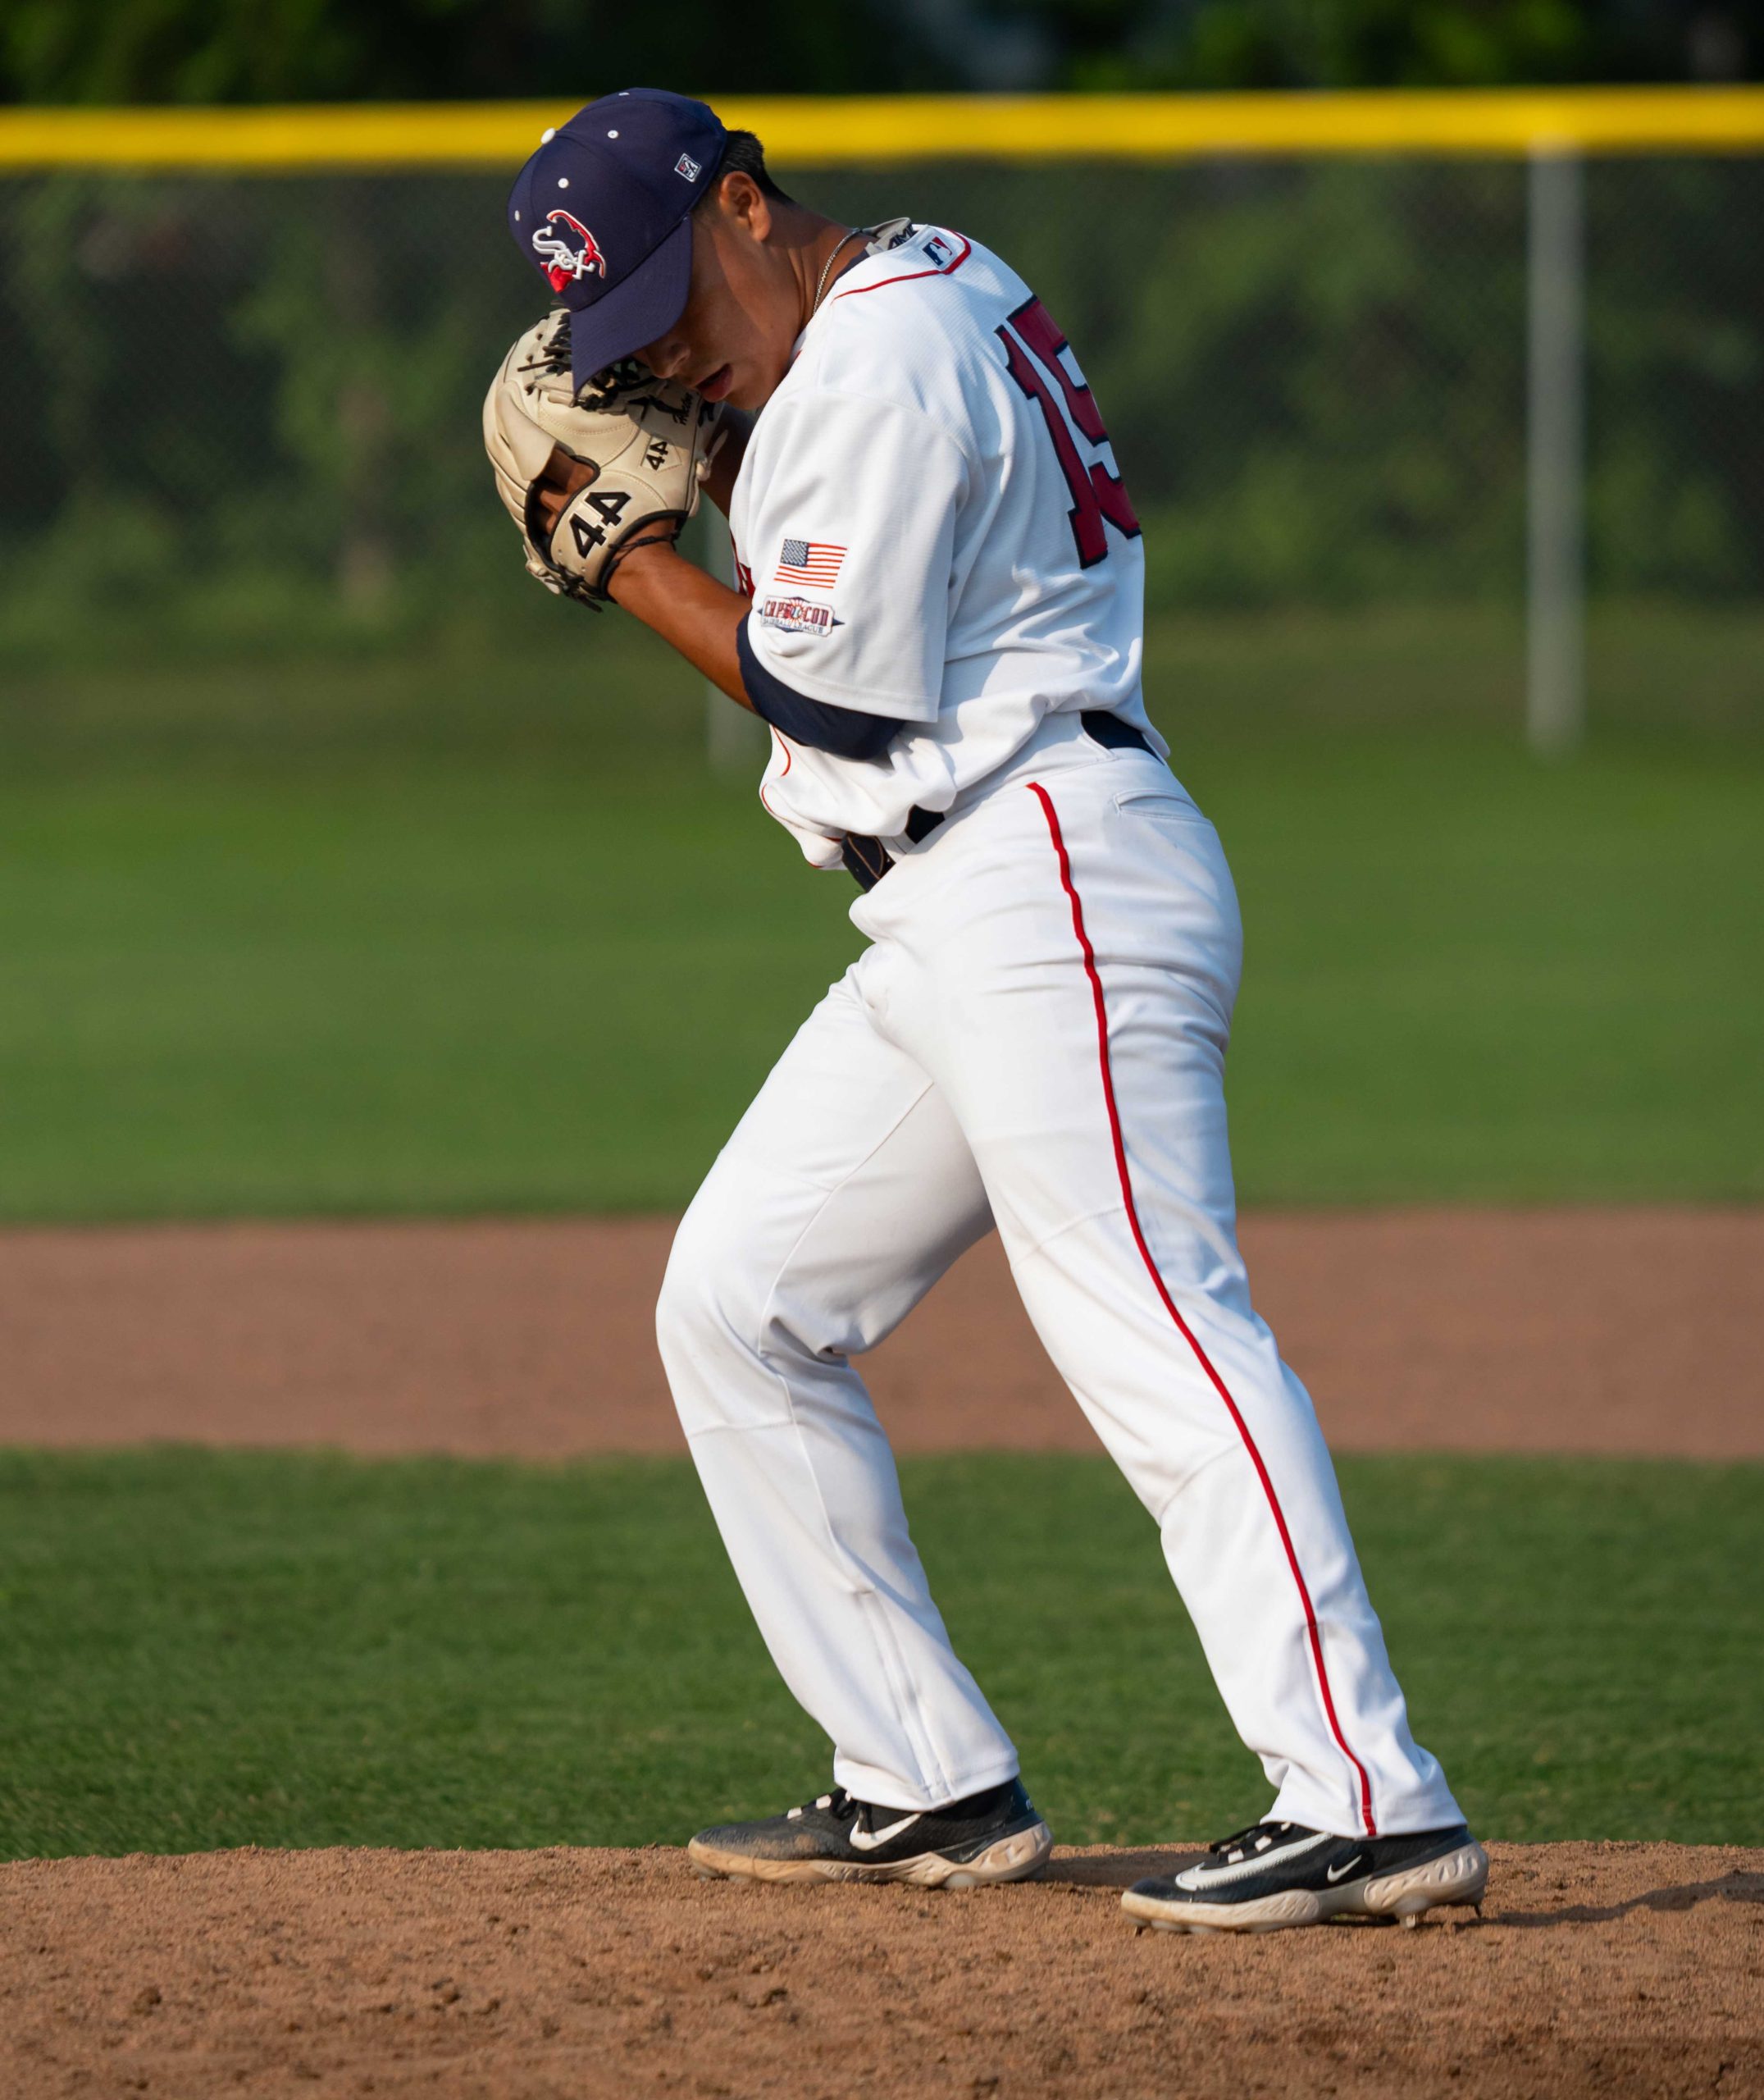 Hector Garcia Looks to Pursue His Dreams After Being Drafted By the Twins - YARMOUTH